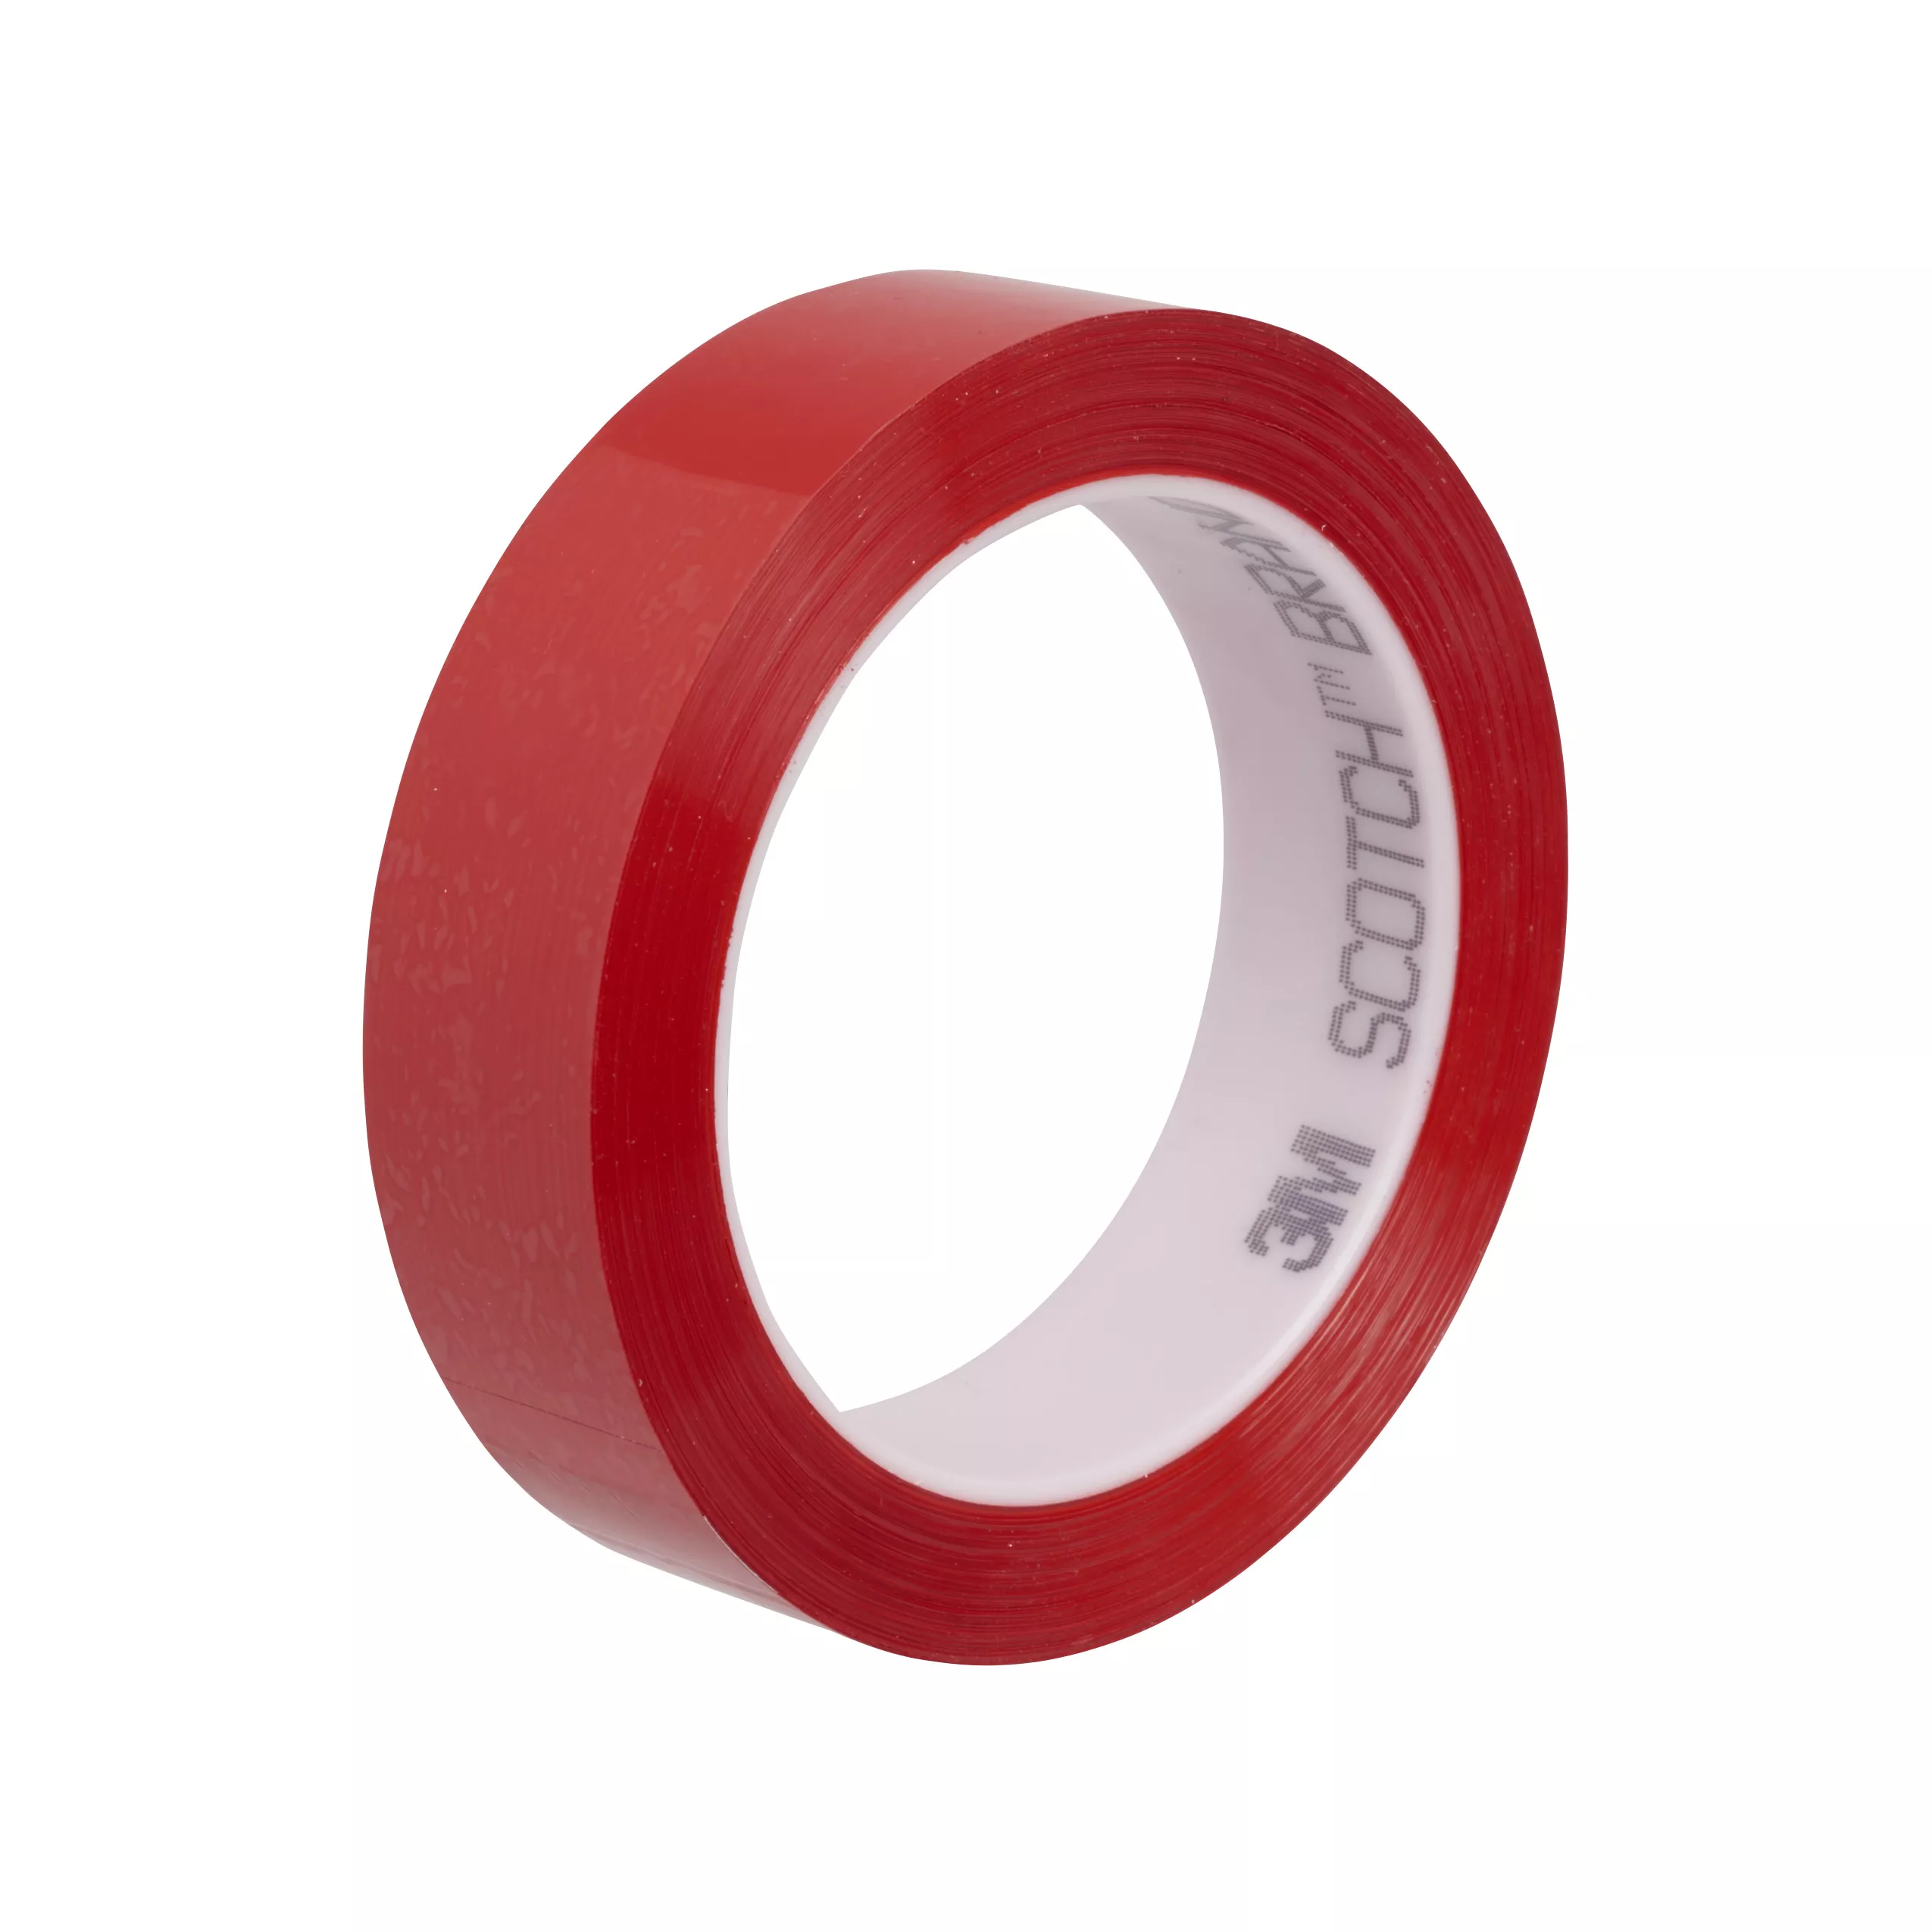 3M™ Polyester Film Tape 850, Red, 1/2 in x 72 yd, 1.9 mil, 72 Roll/Case